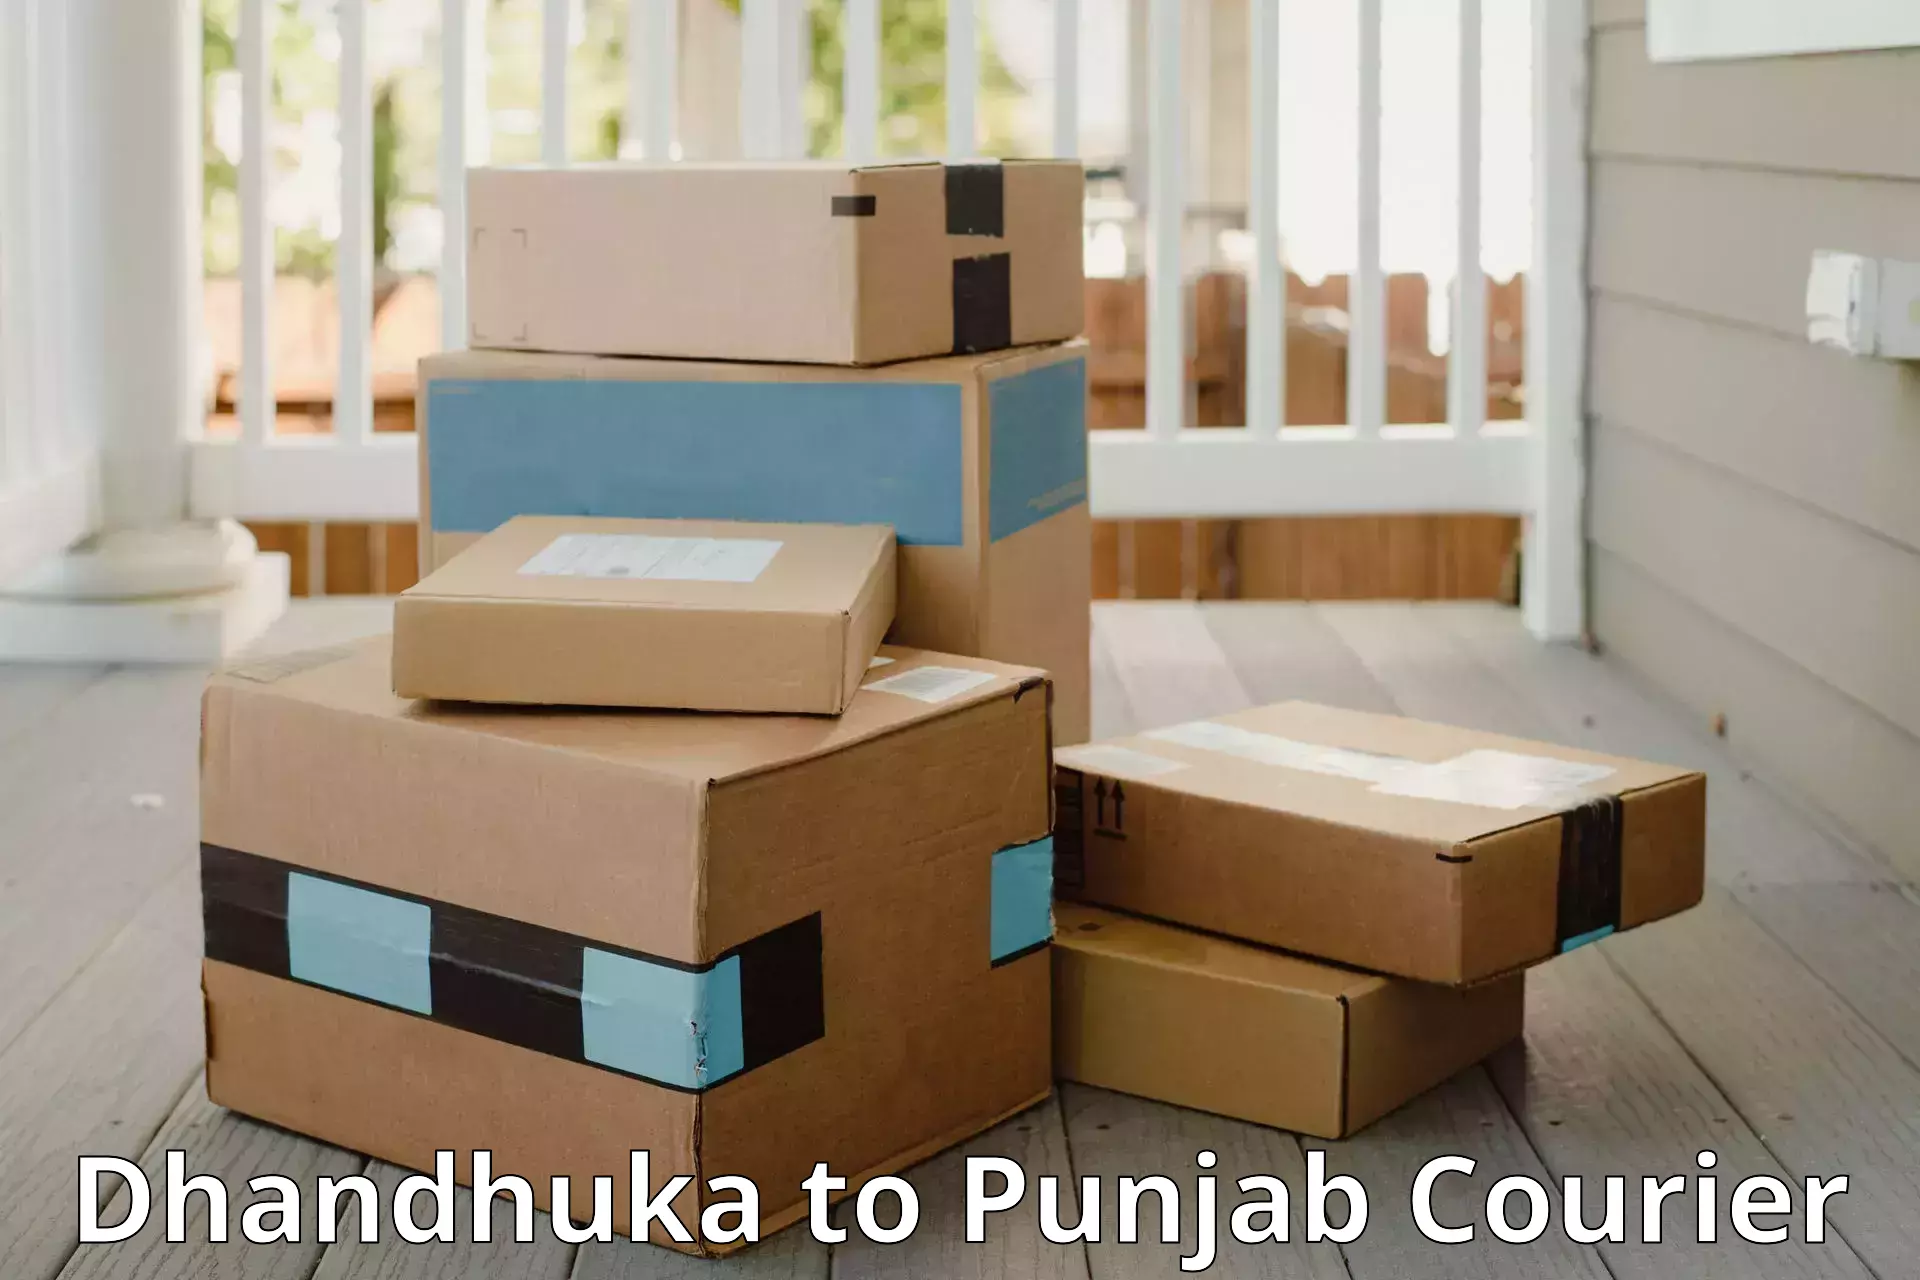 Luggage transport service in Dhandhuka to Mohali